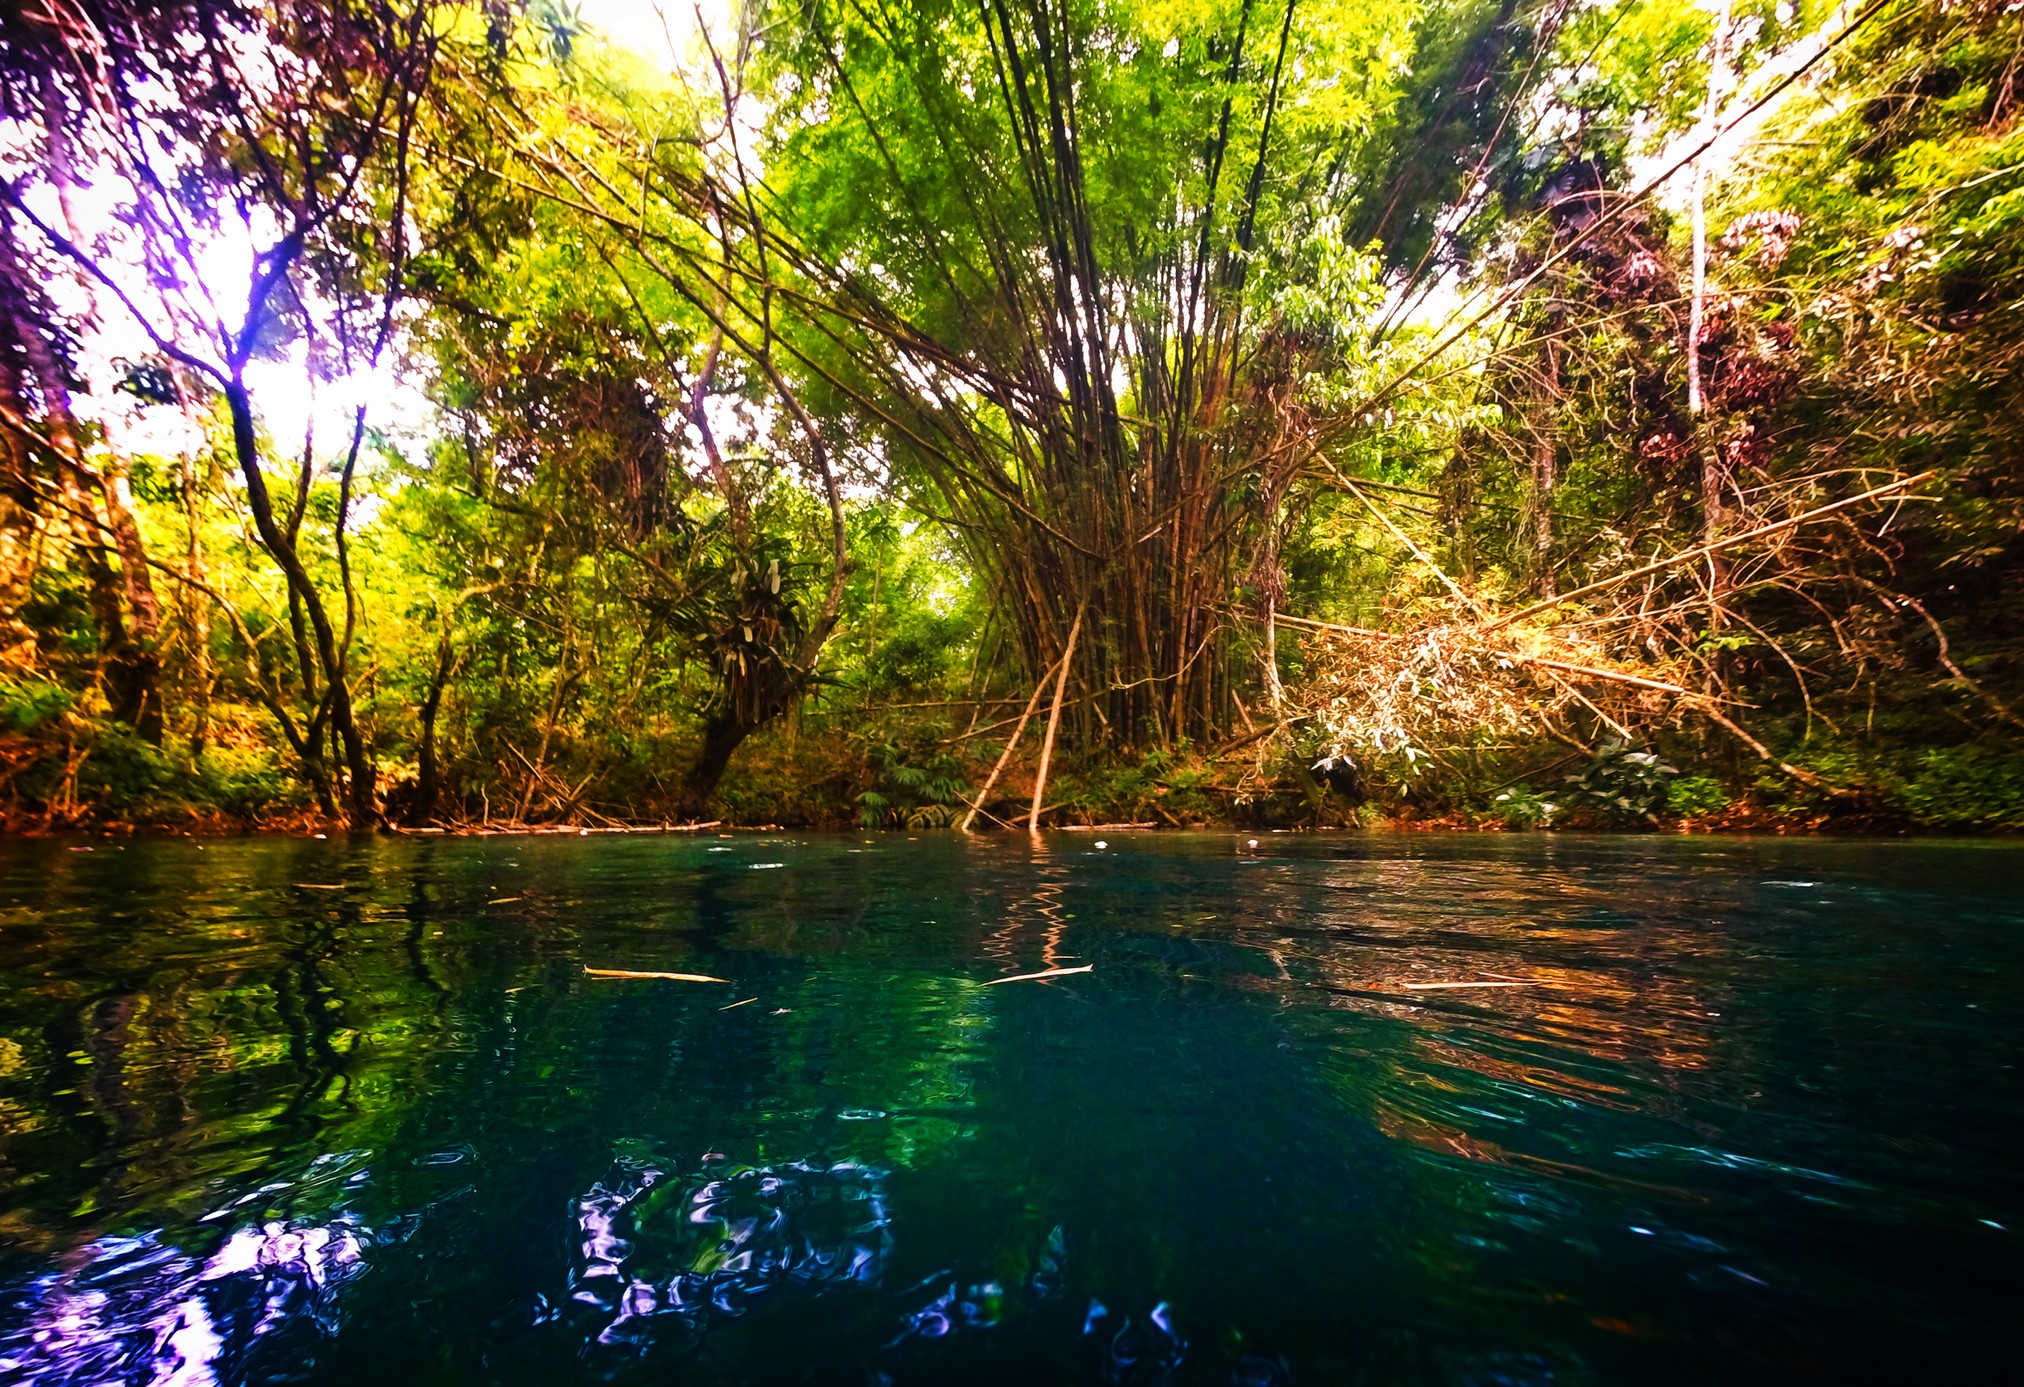 Floating the White River in Ocho Rios, Jamaica